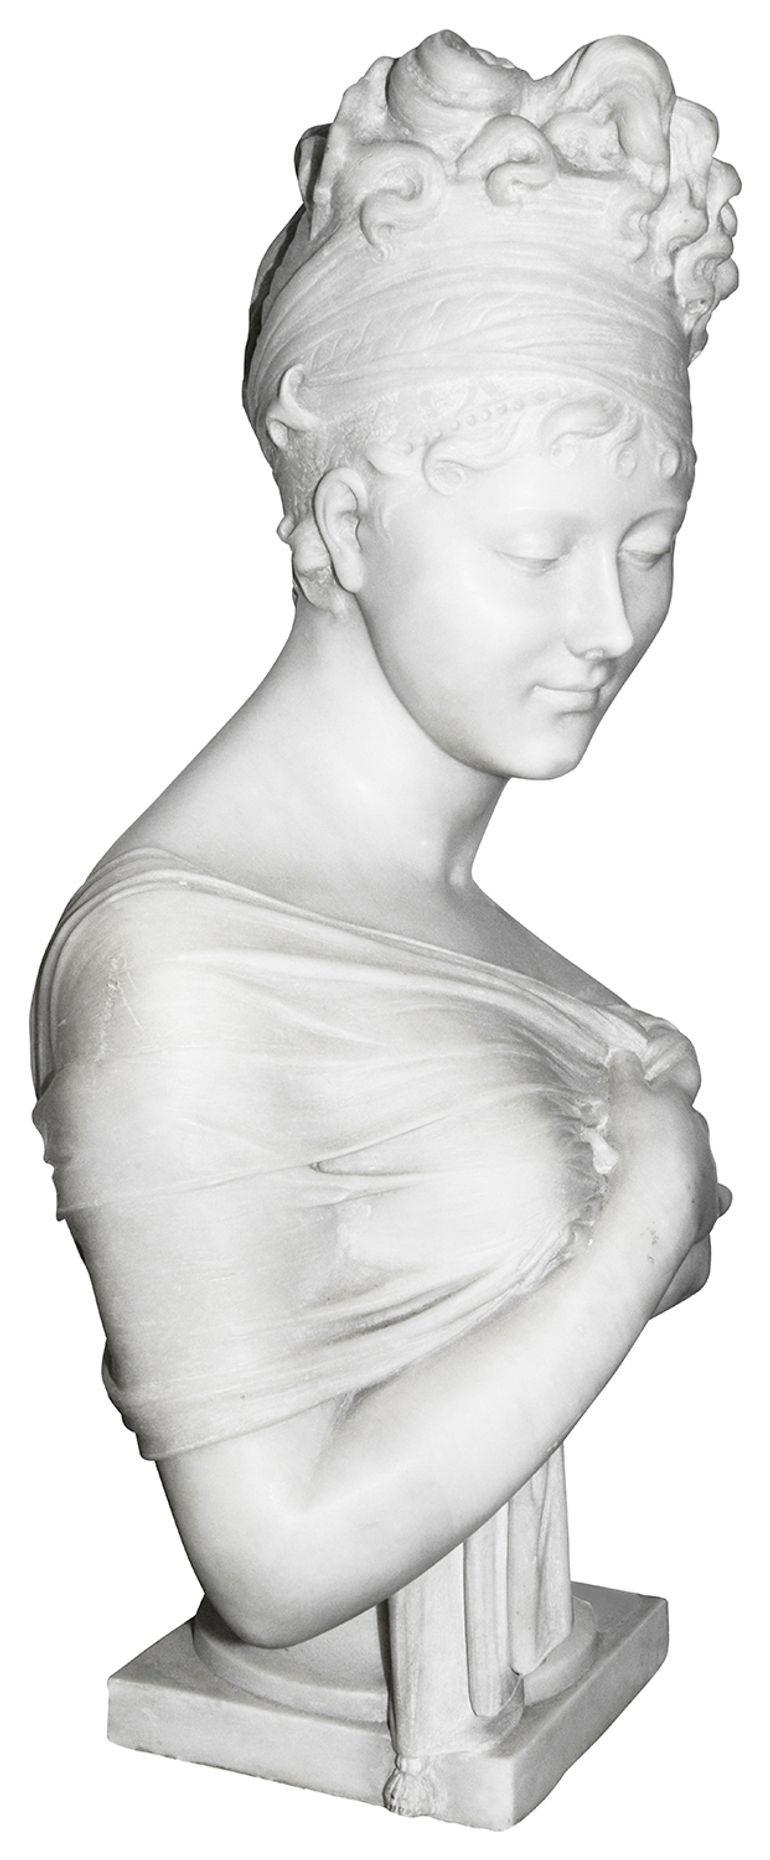 A fine quality classical 19th Century French marble sculpture of Madame Récamier.
Jeanne Françoise Julie Adélaïde Récamier, known as Juliette, was a French socialite whose salon drew people from the leading literary and political circles of early